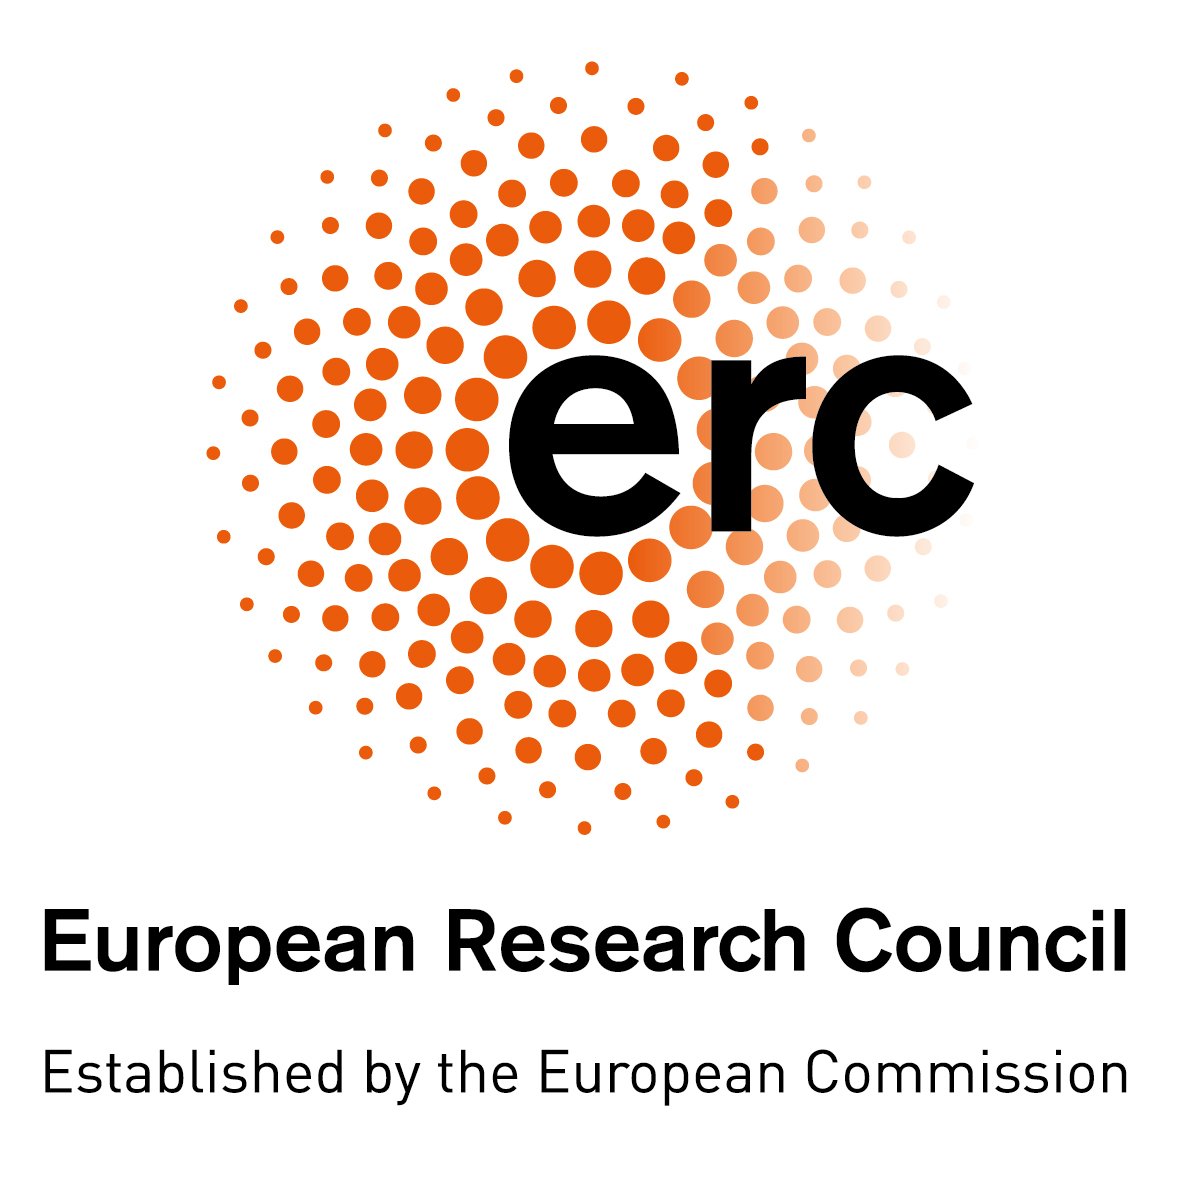 In order to ensure Europe’s competitive edge in global science and technology, the ERC Scientific Council calls for a doubling of the budget of the next EU research framework programme (FP10) and maintaining the ERC’s independence. Read the statement: erc.europa.eu/news-events/ne…